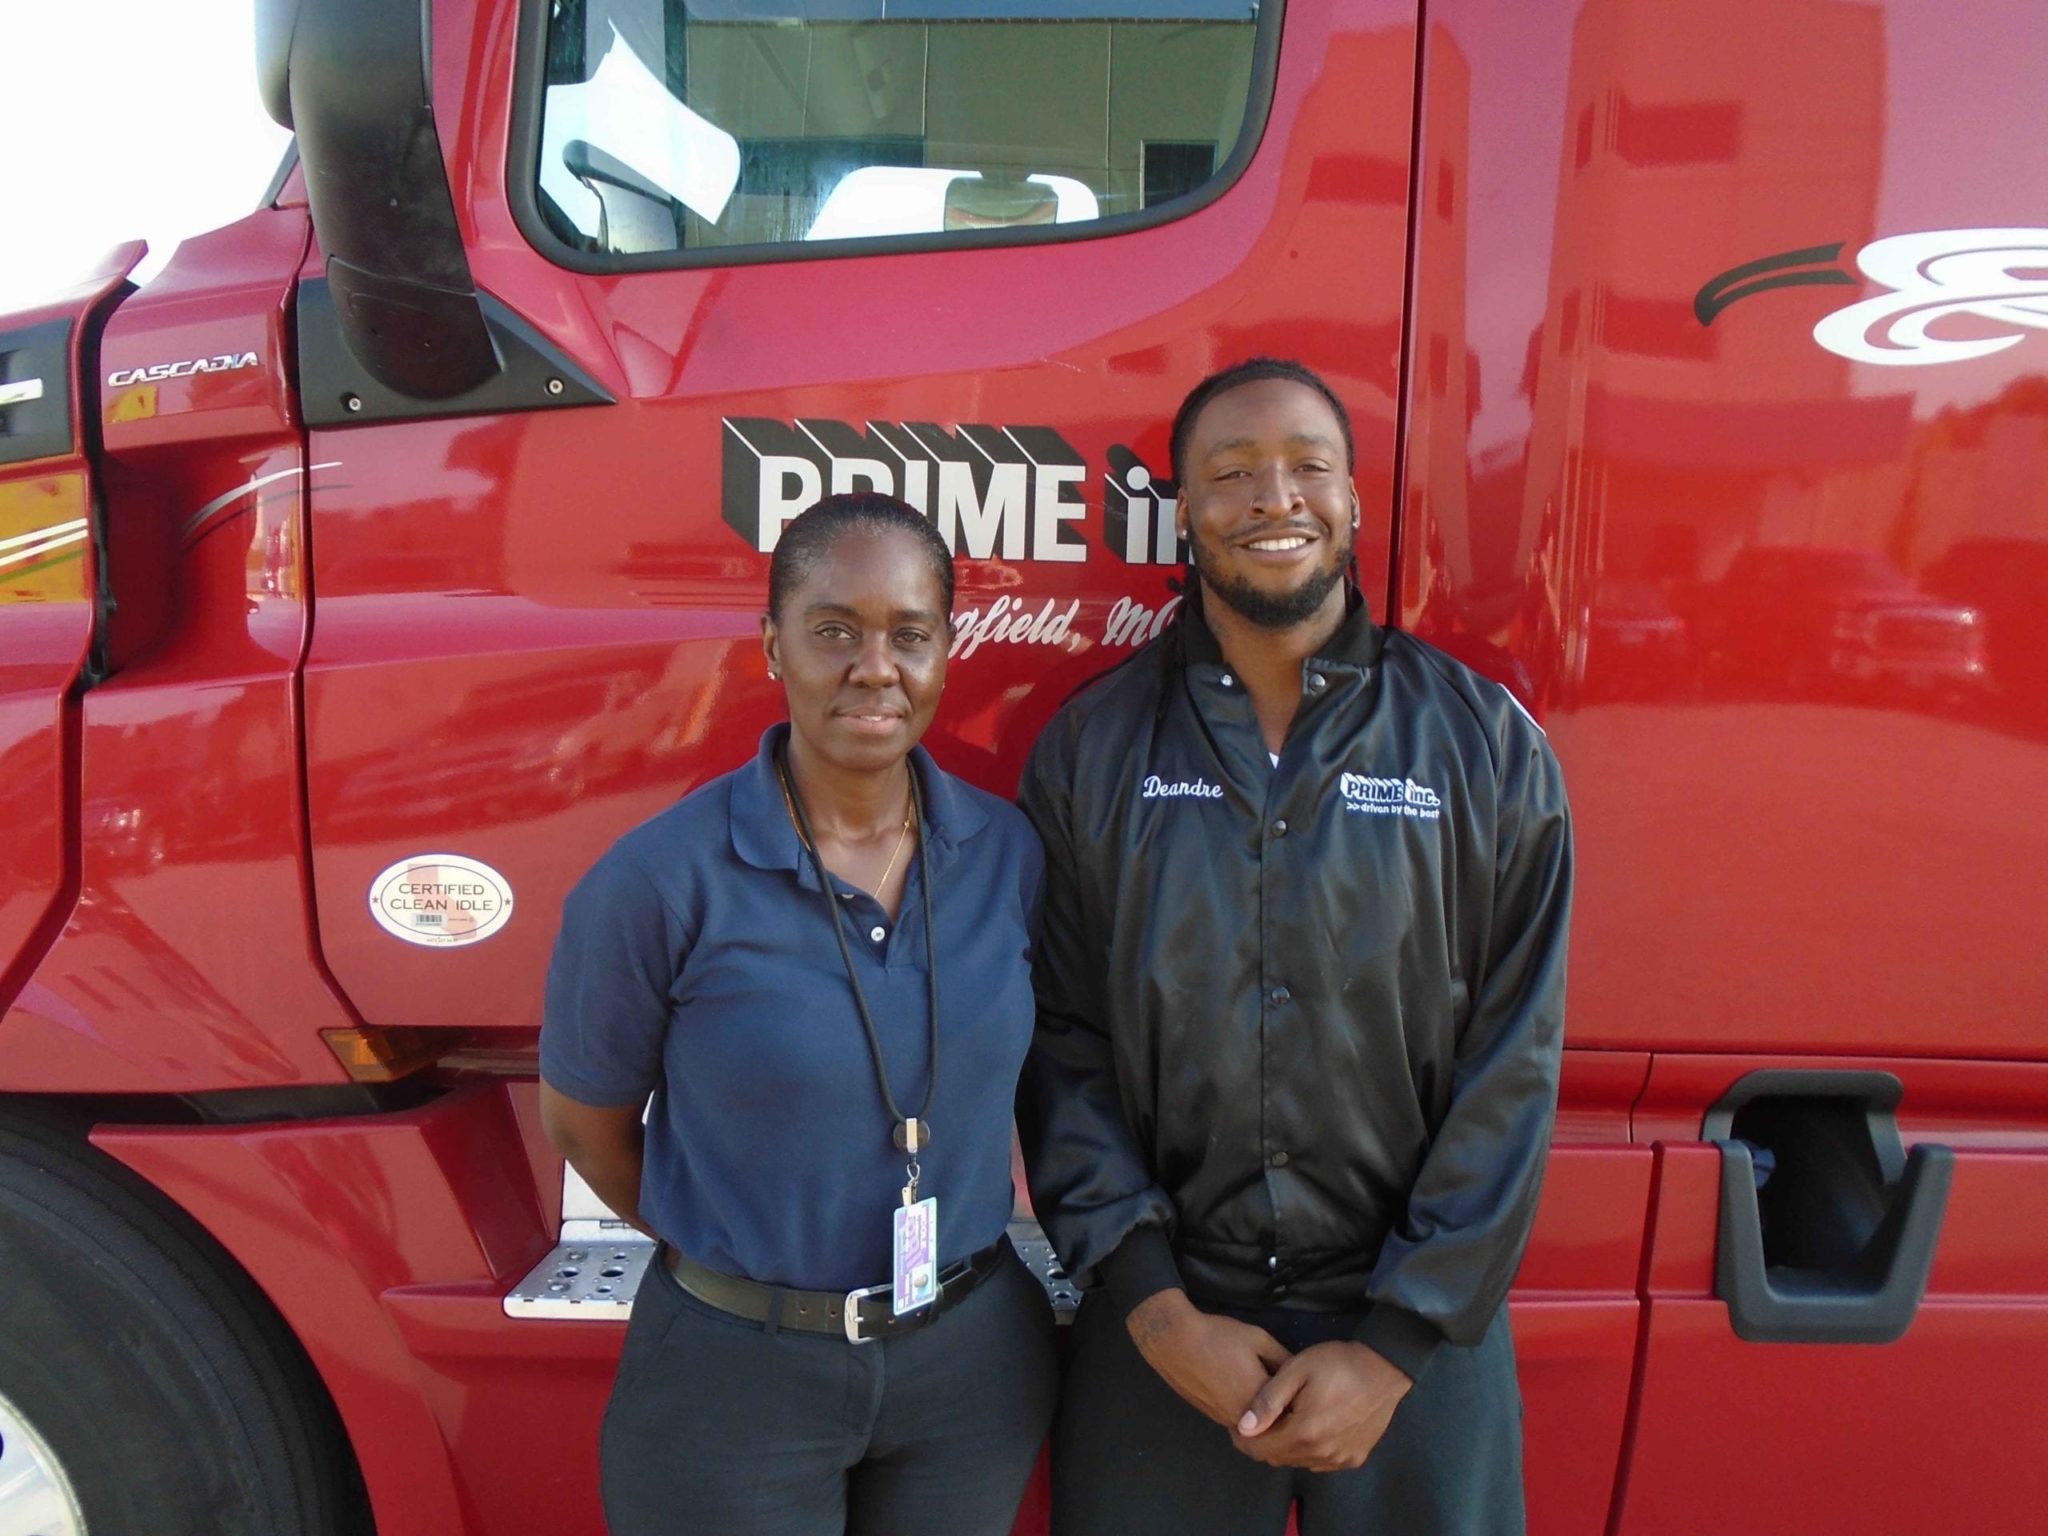 Deandre, a Prime student truck driver. standing with his instructor in front of a red semi-truck.